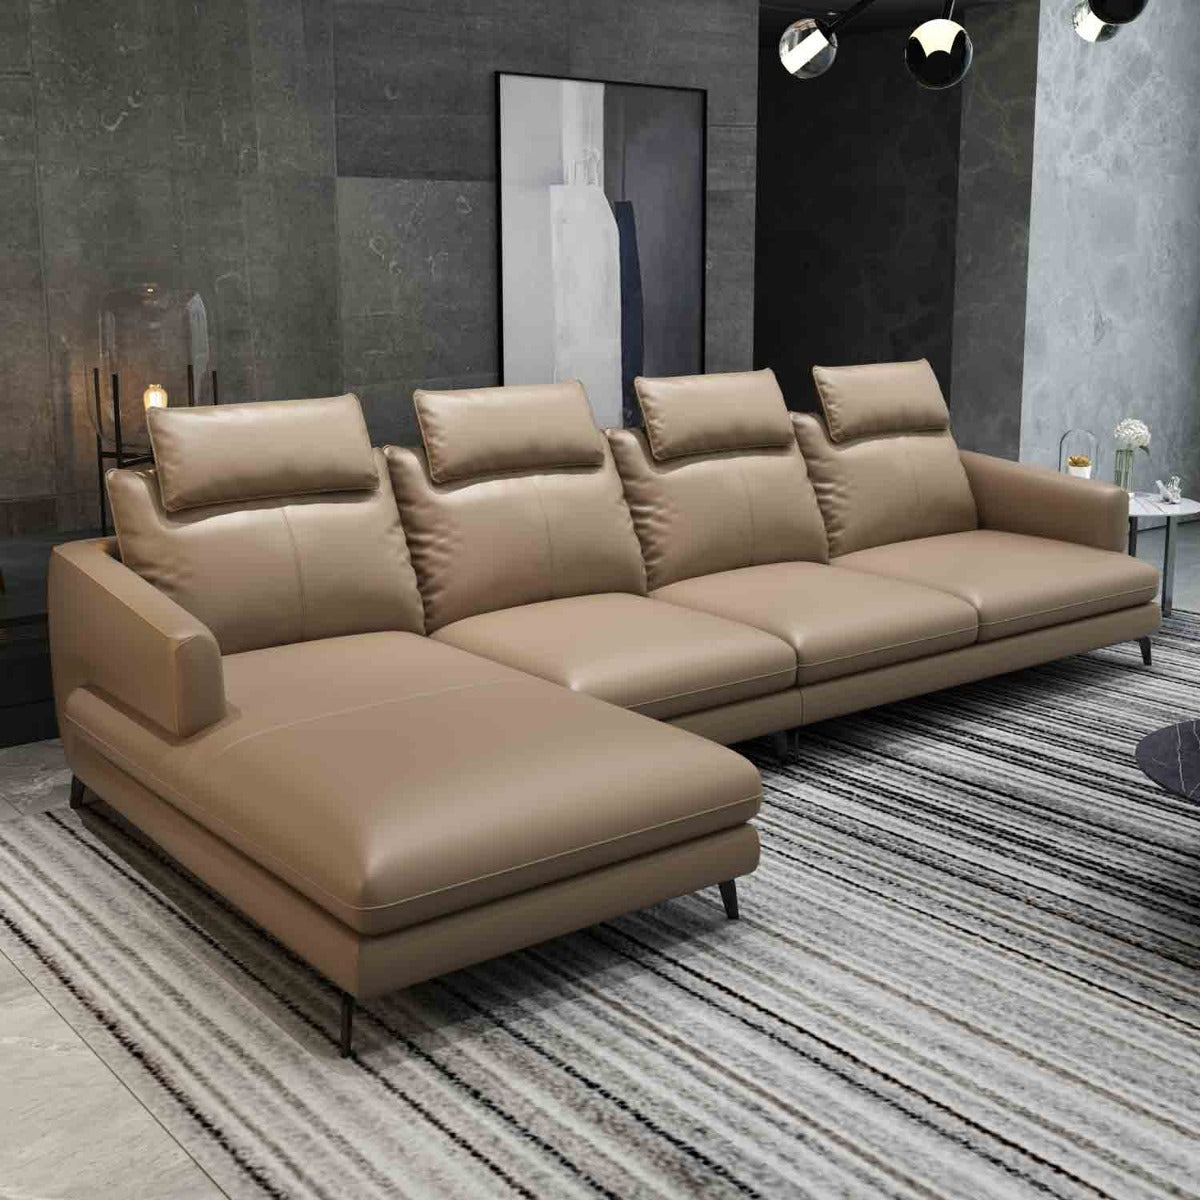 European Furniture - Marconi Left Hand Facing Sectional in Tan - 74535L-3LHC - New Star Living